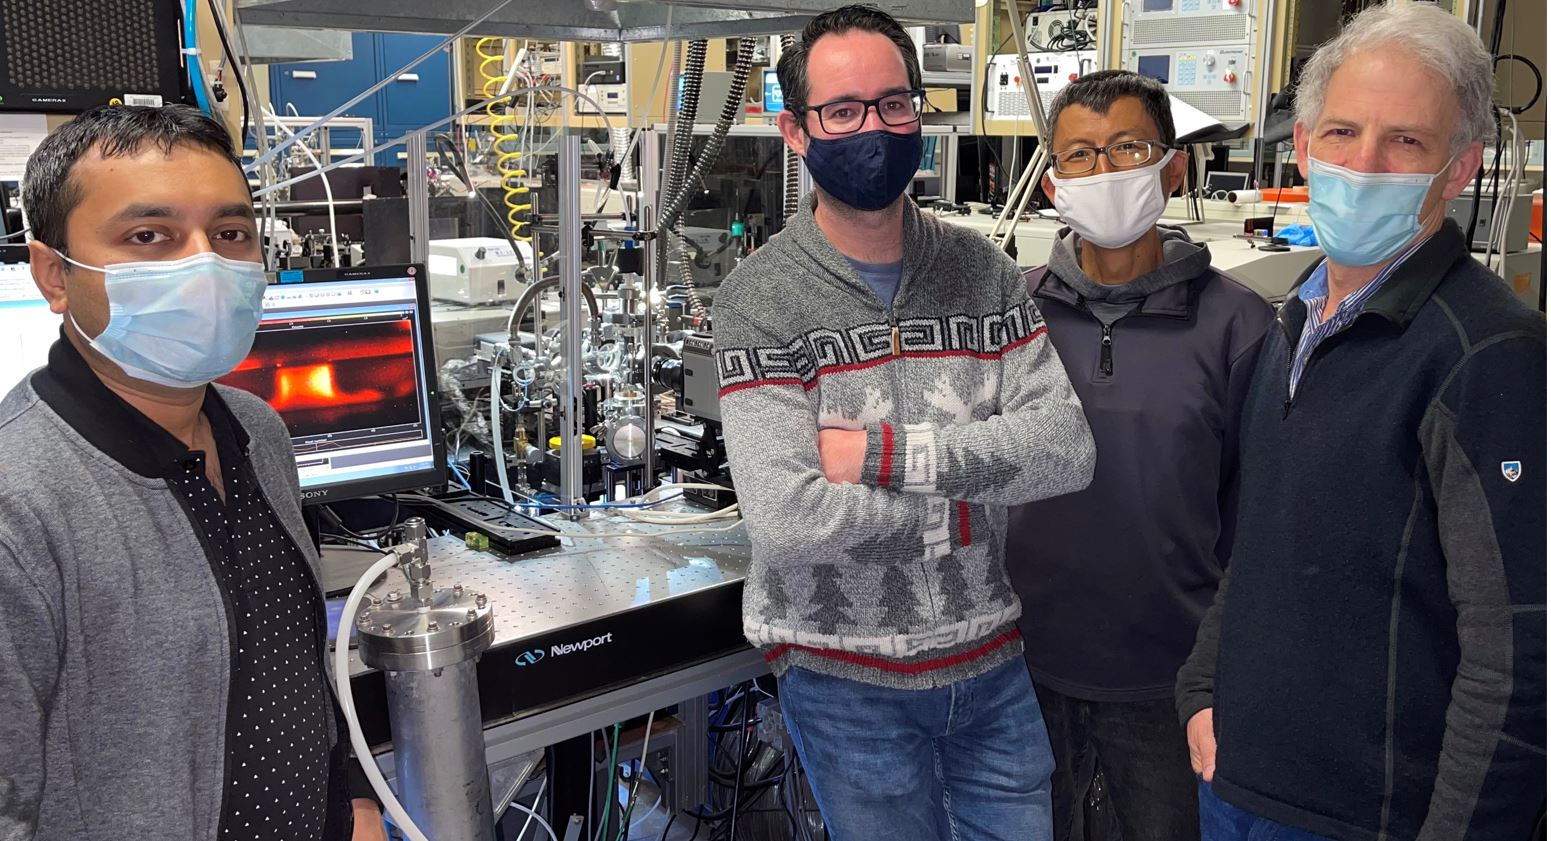 From left, Malik Tahiyat, from University of South Carolina, and Sandia scientists Dirk van den Bekerom, Erxiong Huang, and Jonathan Frank are all performing experiments in the Plasma Research Facility. Photo by Angie Zhang